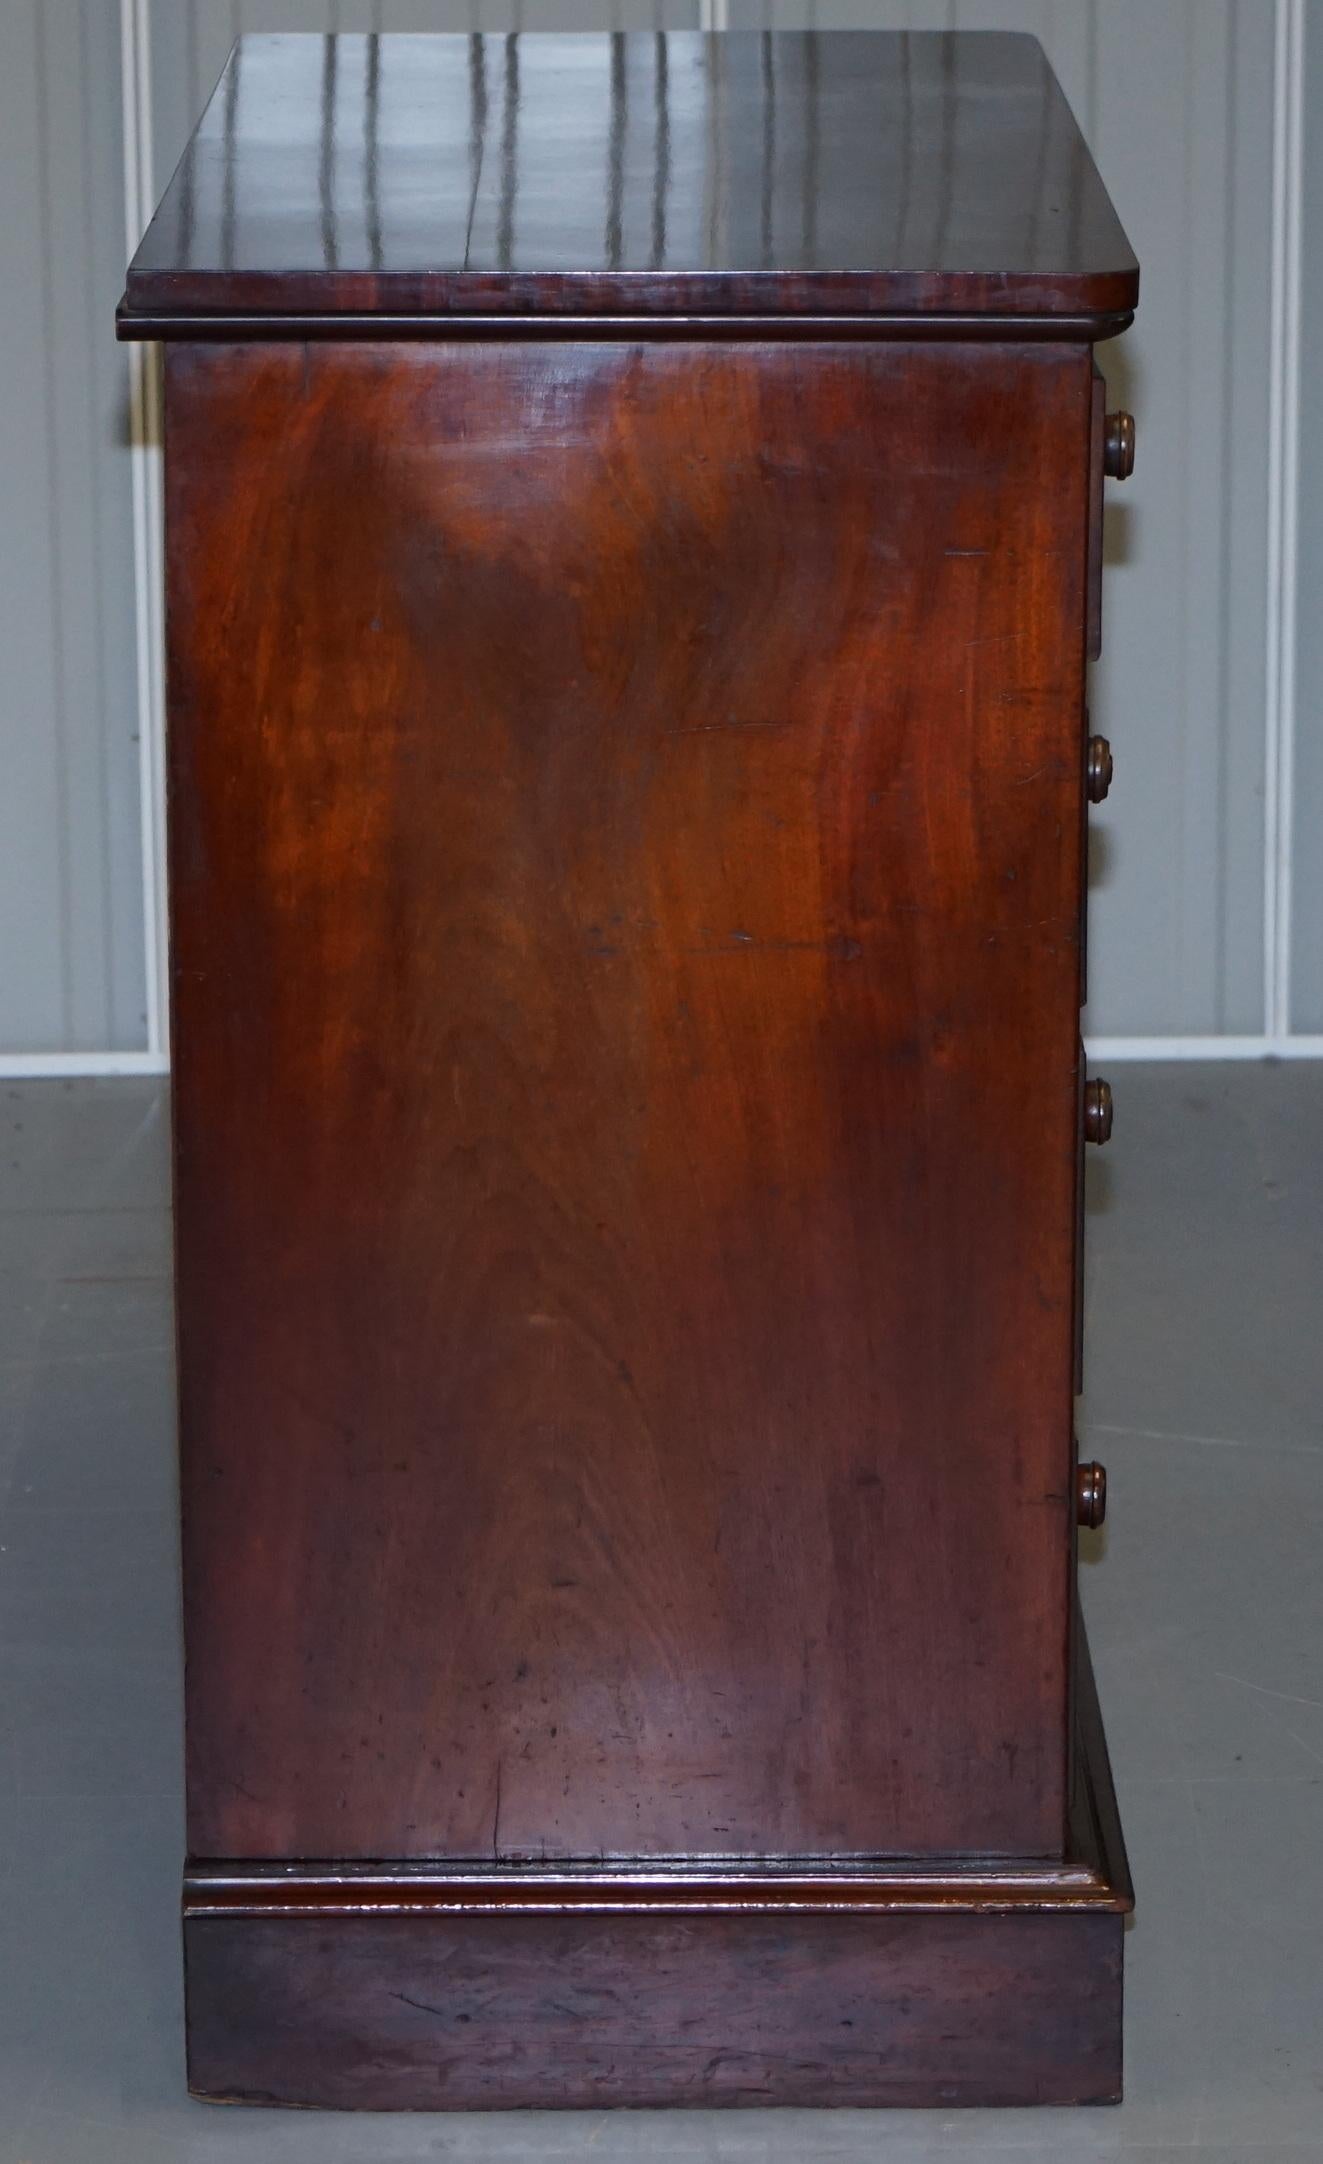 Rare circa 1760 Thomas Wilson 68 Great Queen Street Hardwood Chest of Drawers For Sale 6